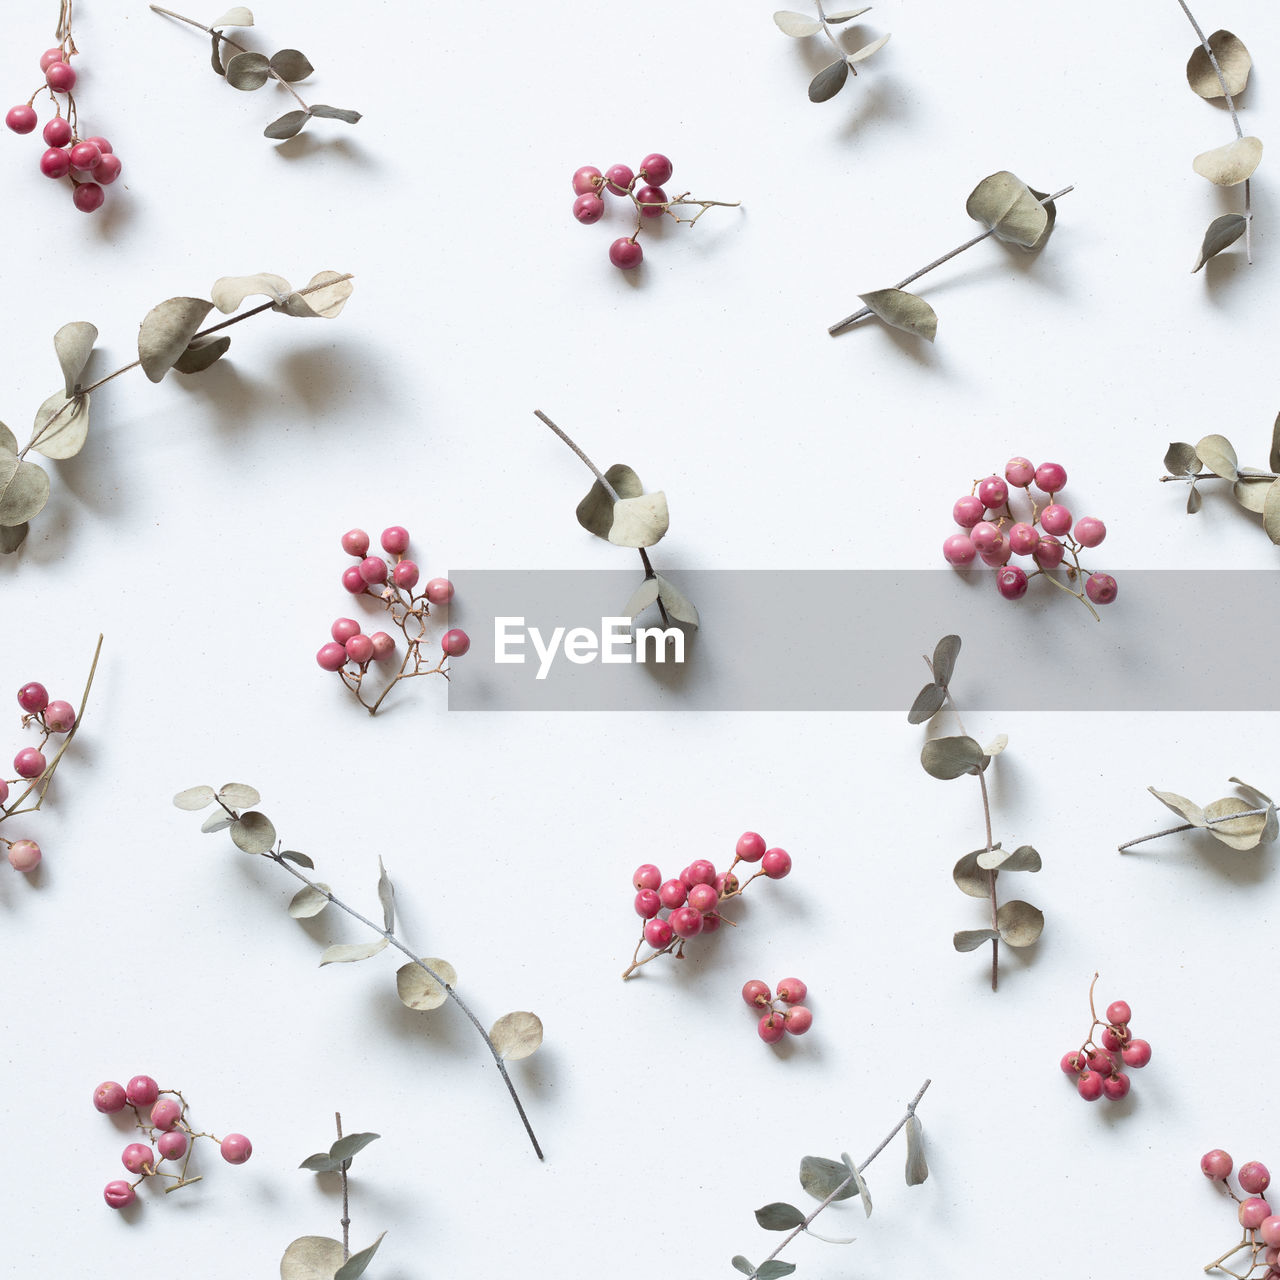 earring, large group of objects, petal, jewellery, fashion accessory, studio shot, bead, indoors, high angle view, no people, white background, flower, knolling - concept, art, still life, variation, abundance